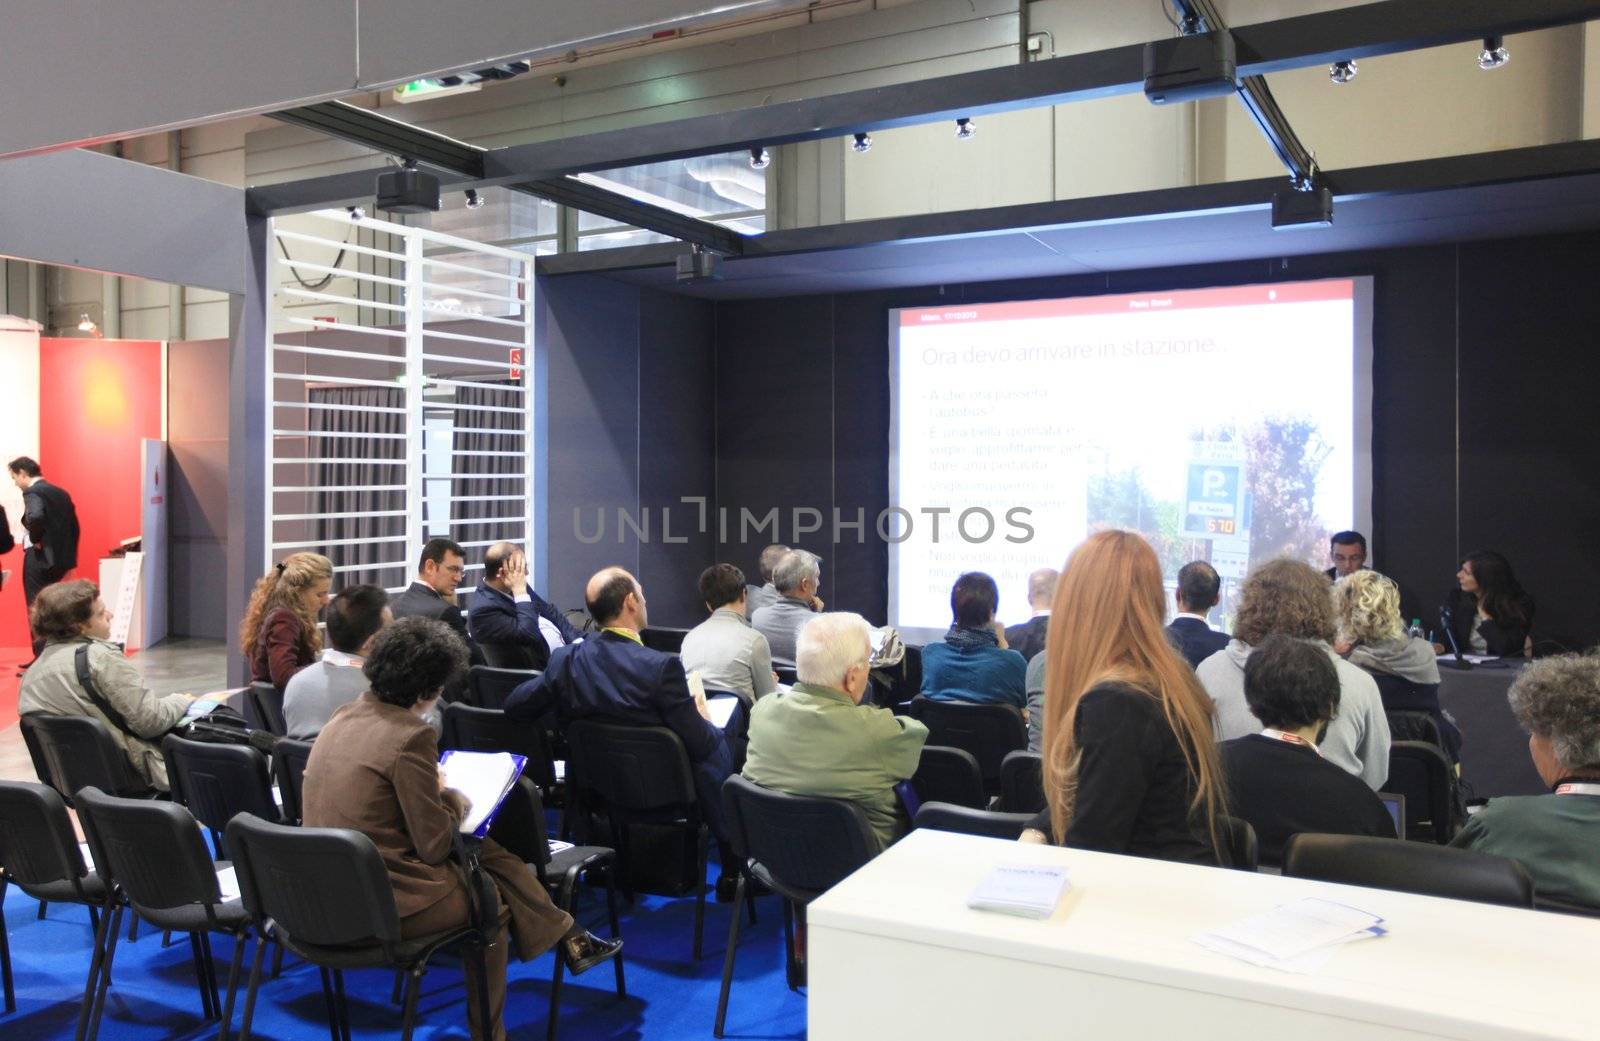 MILAN, ITALY - OCTOBER 17: People attending business meeting during SMAU, international fair of business intelligence and information technology October 17, 2012 in Milan, Italy.